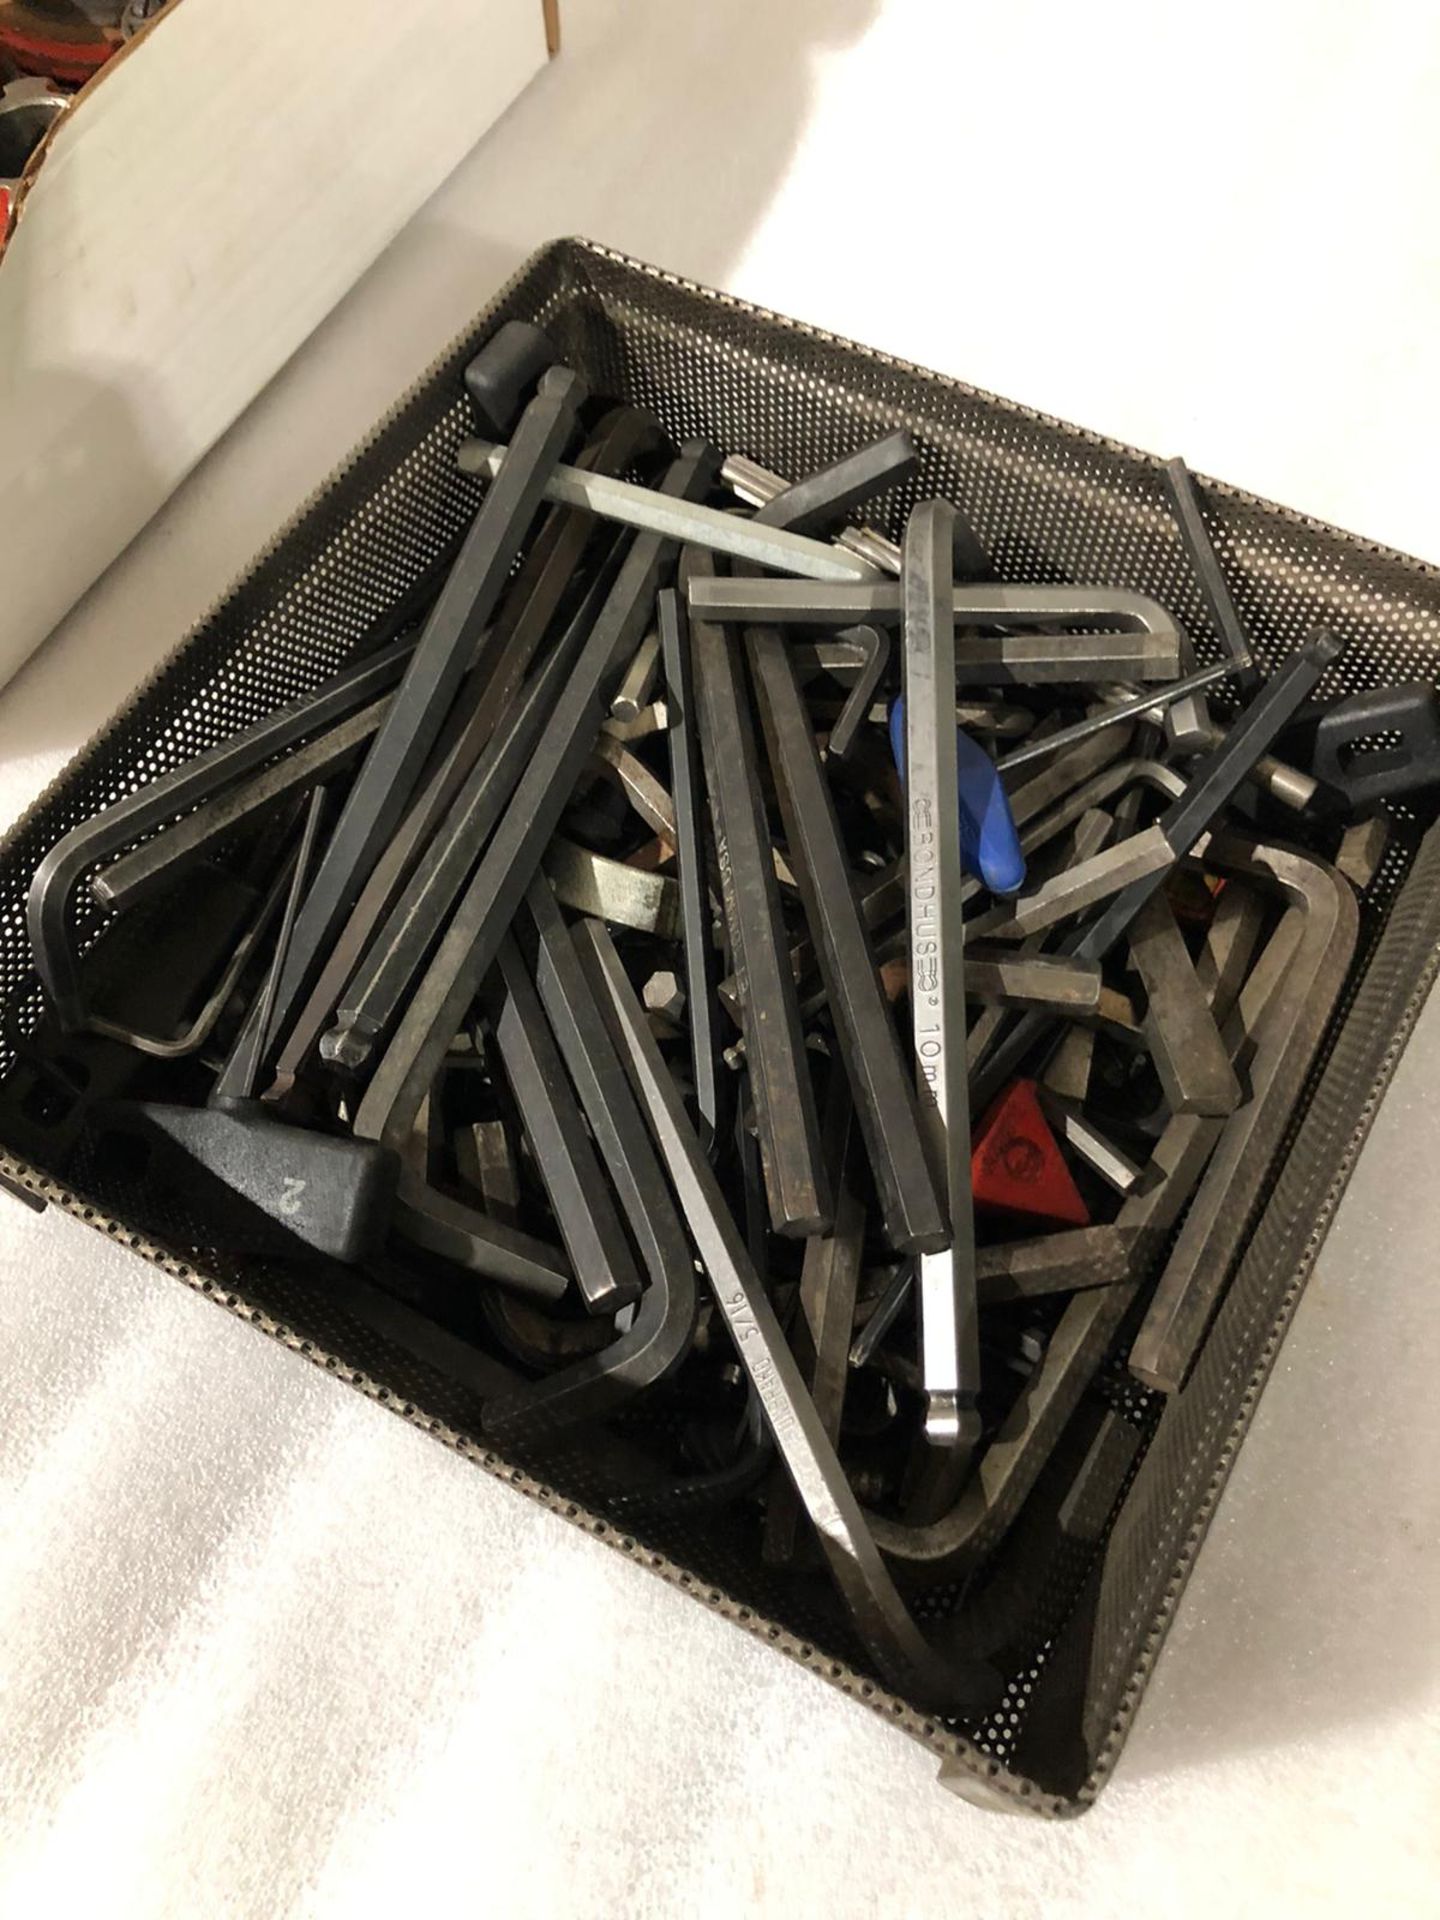 Lot of Allen Key Wrench Units - Image 2 of 2